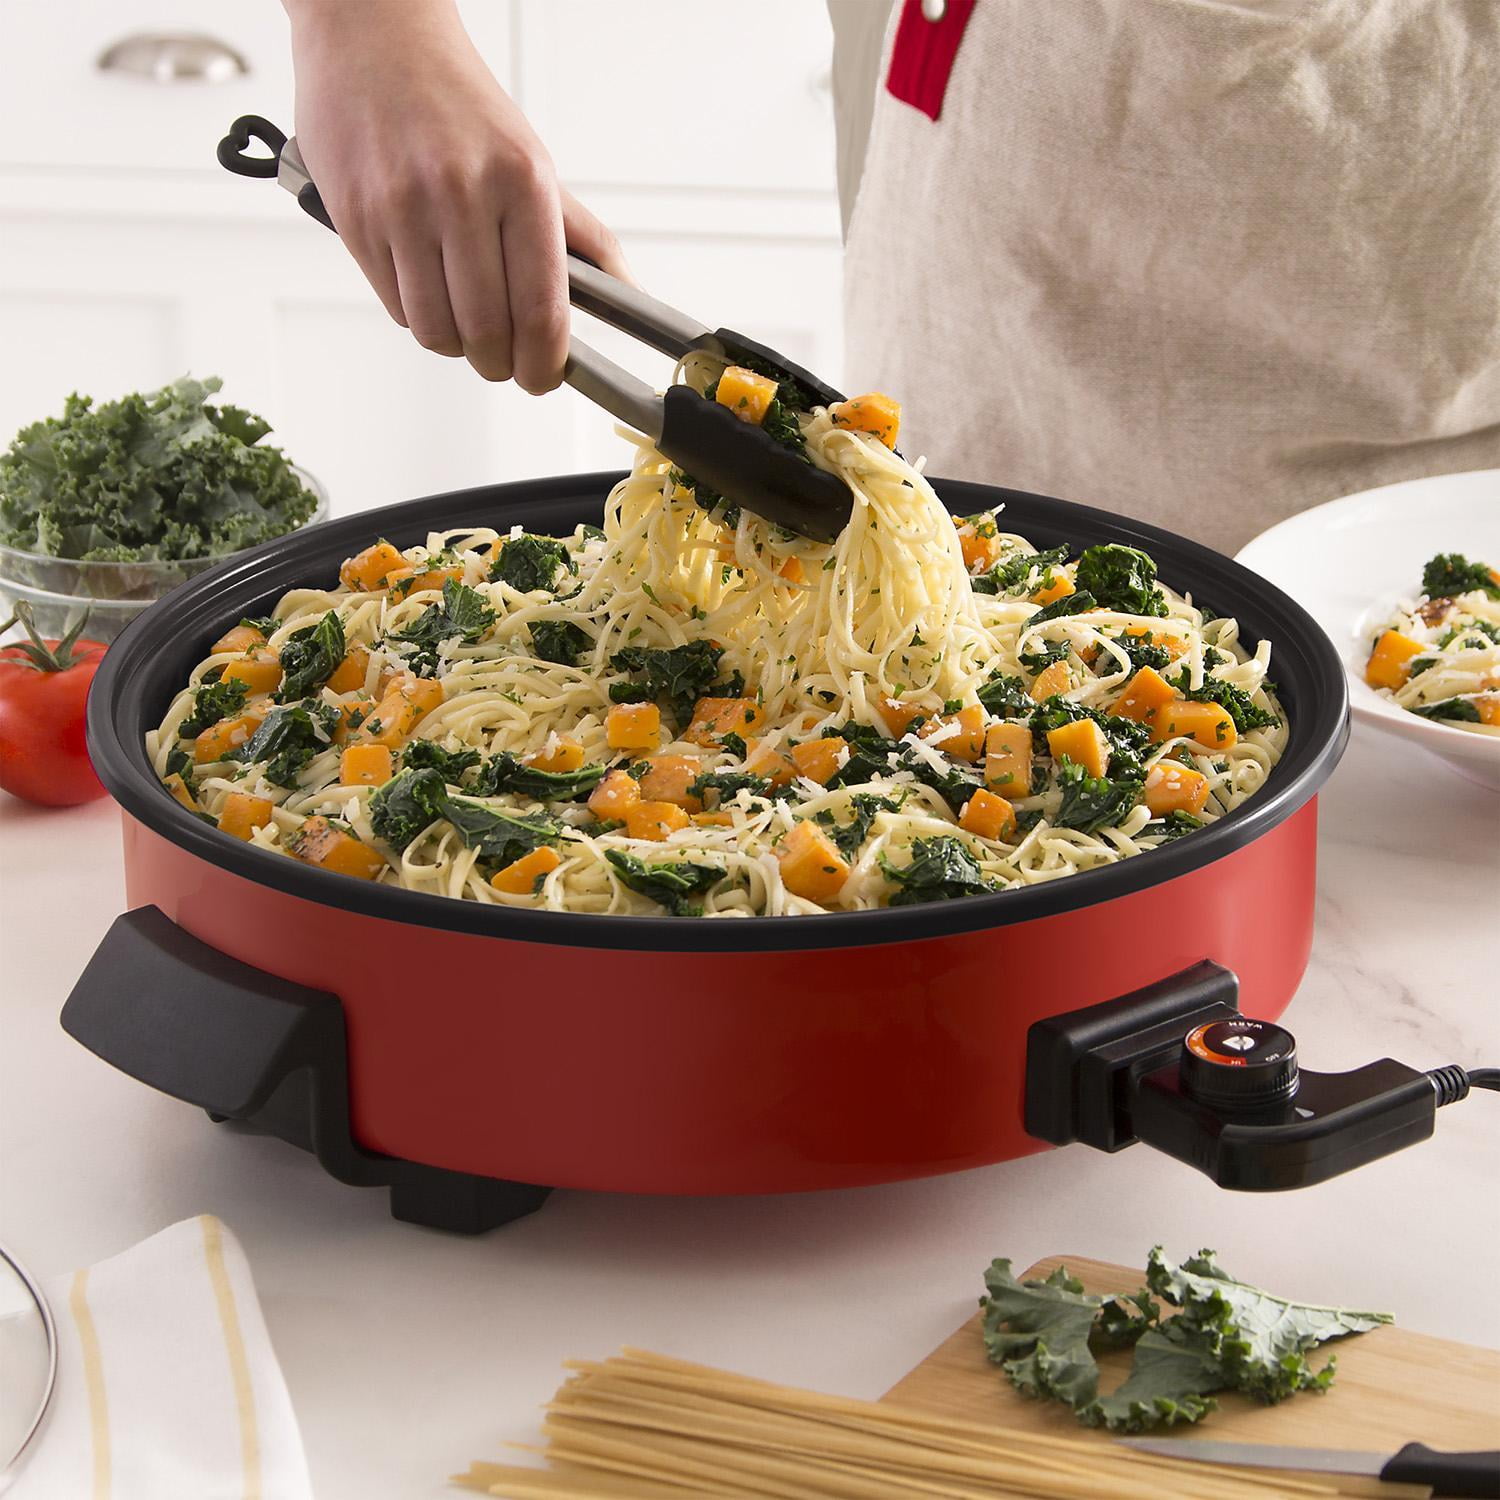 Dash Rapid Heat Large 14 Family Size Electric Skillet RED Non-Stick 5 Qt  1400W